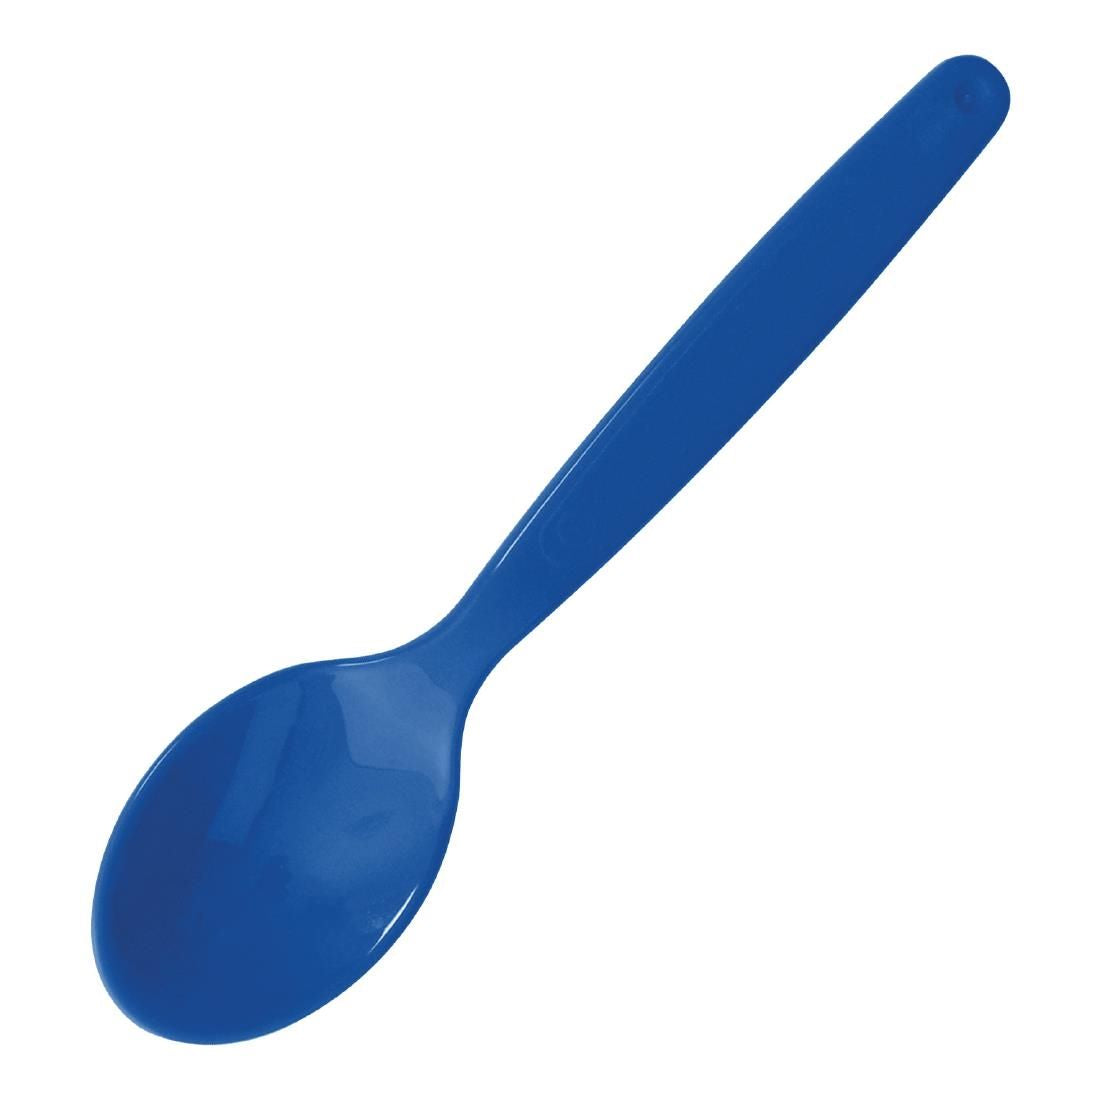 DL125 Polycarbonate Spoon Blue Kristallon (Pack of 12) JD Catering Equipment Solutions Ltd